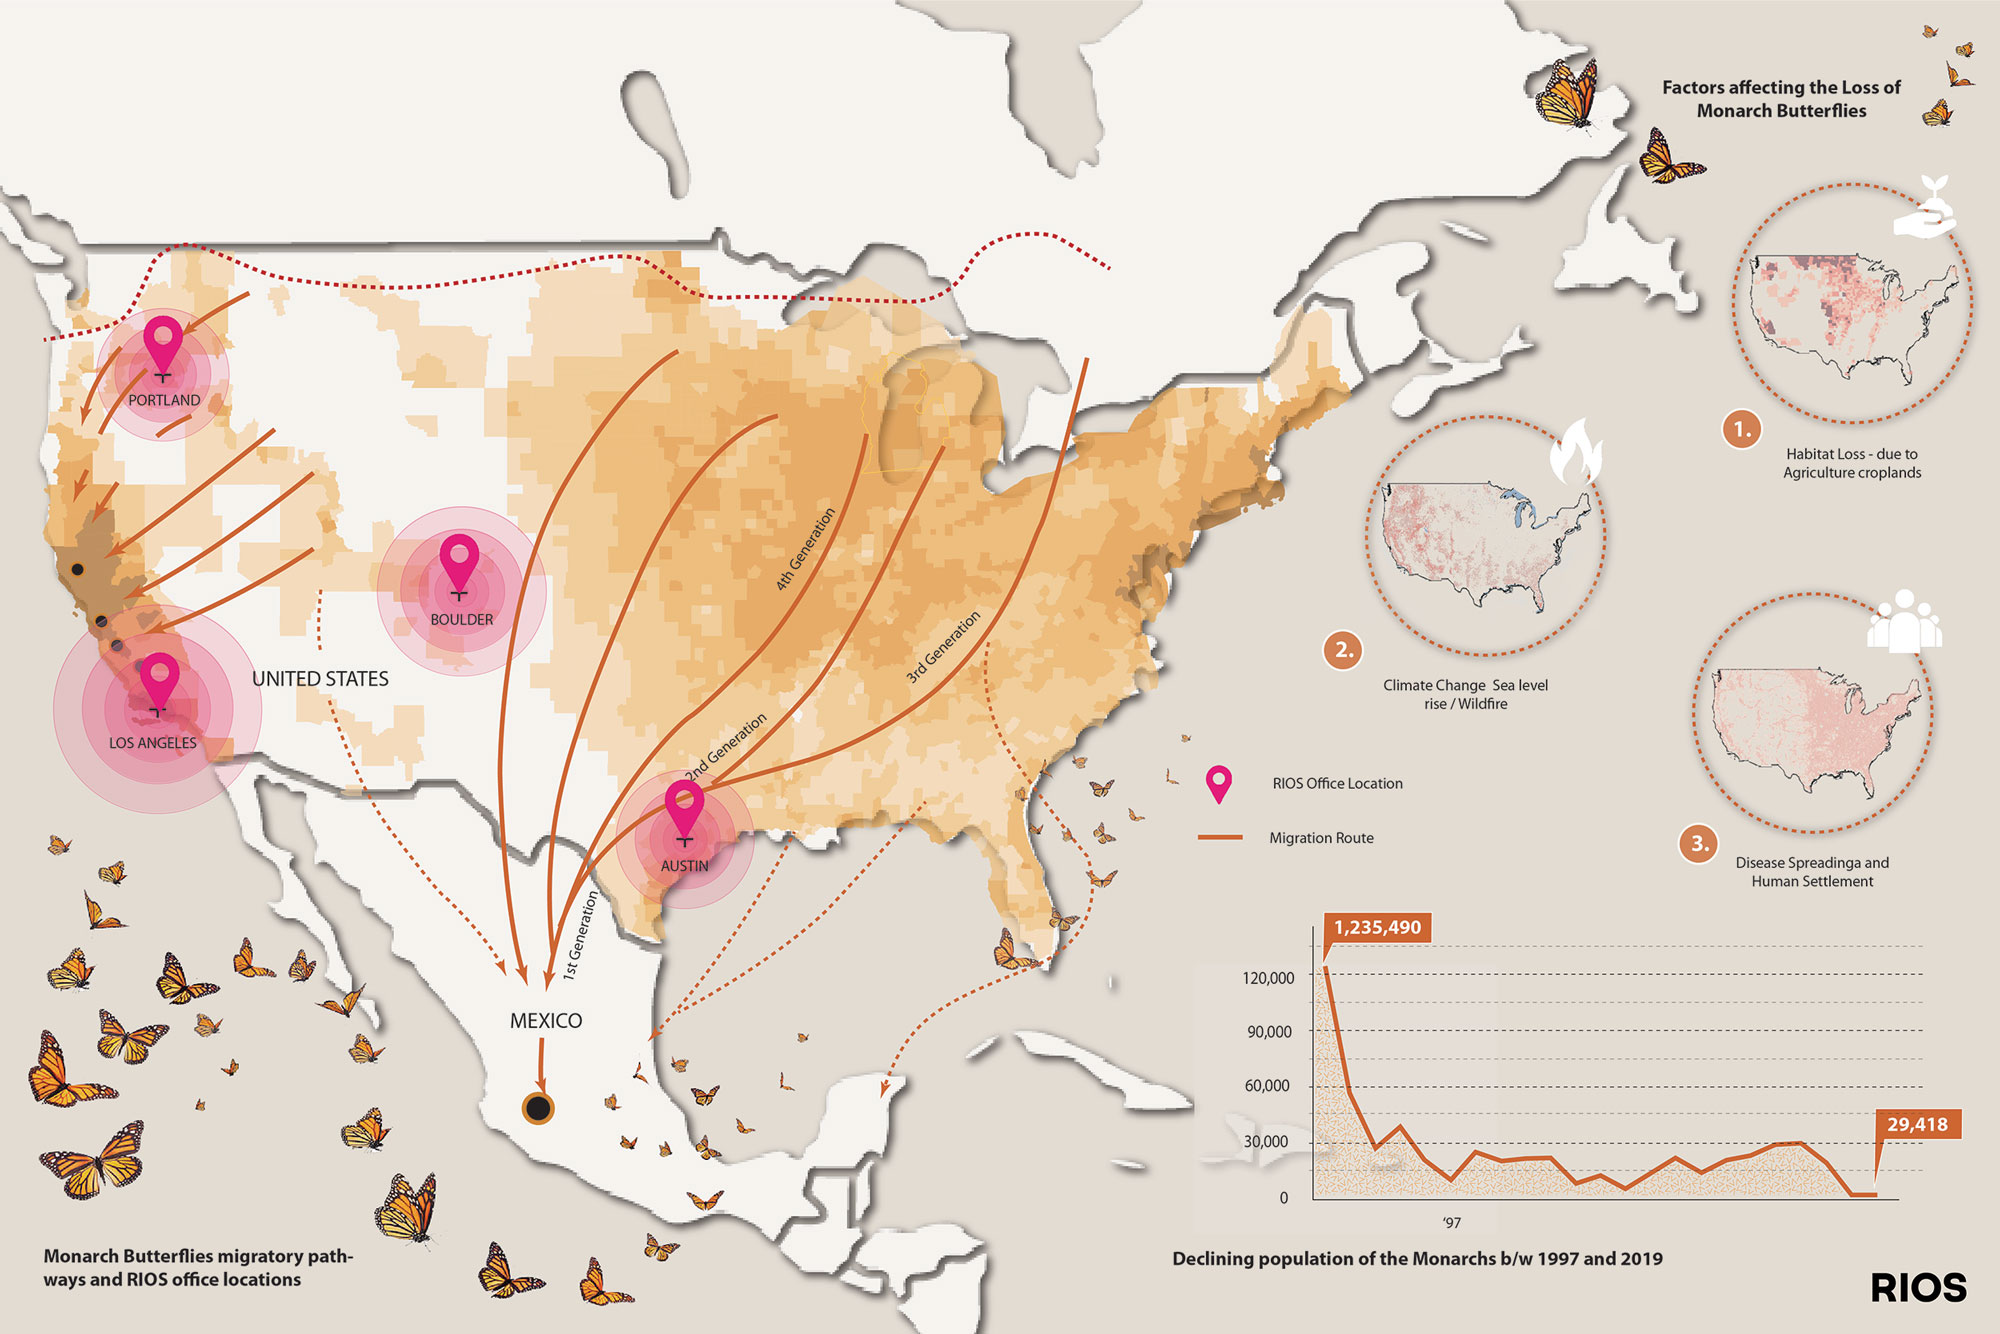 Diagram depicting monarch butterfly migration patterns across the US in relation to RIOS' US offices